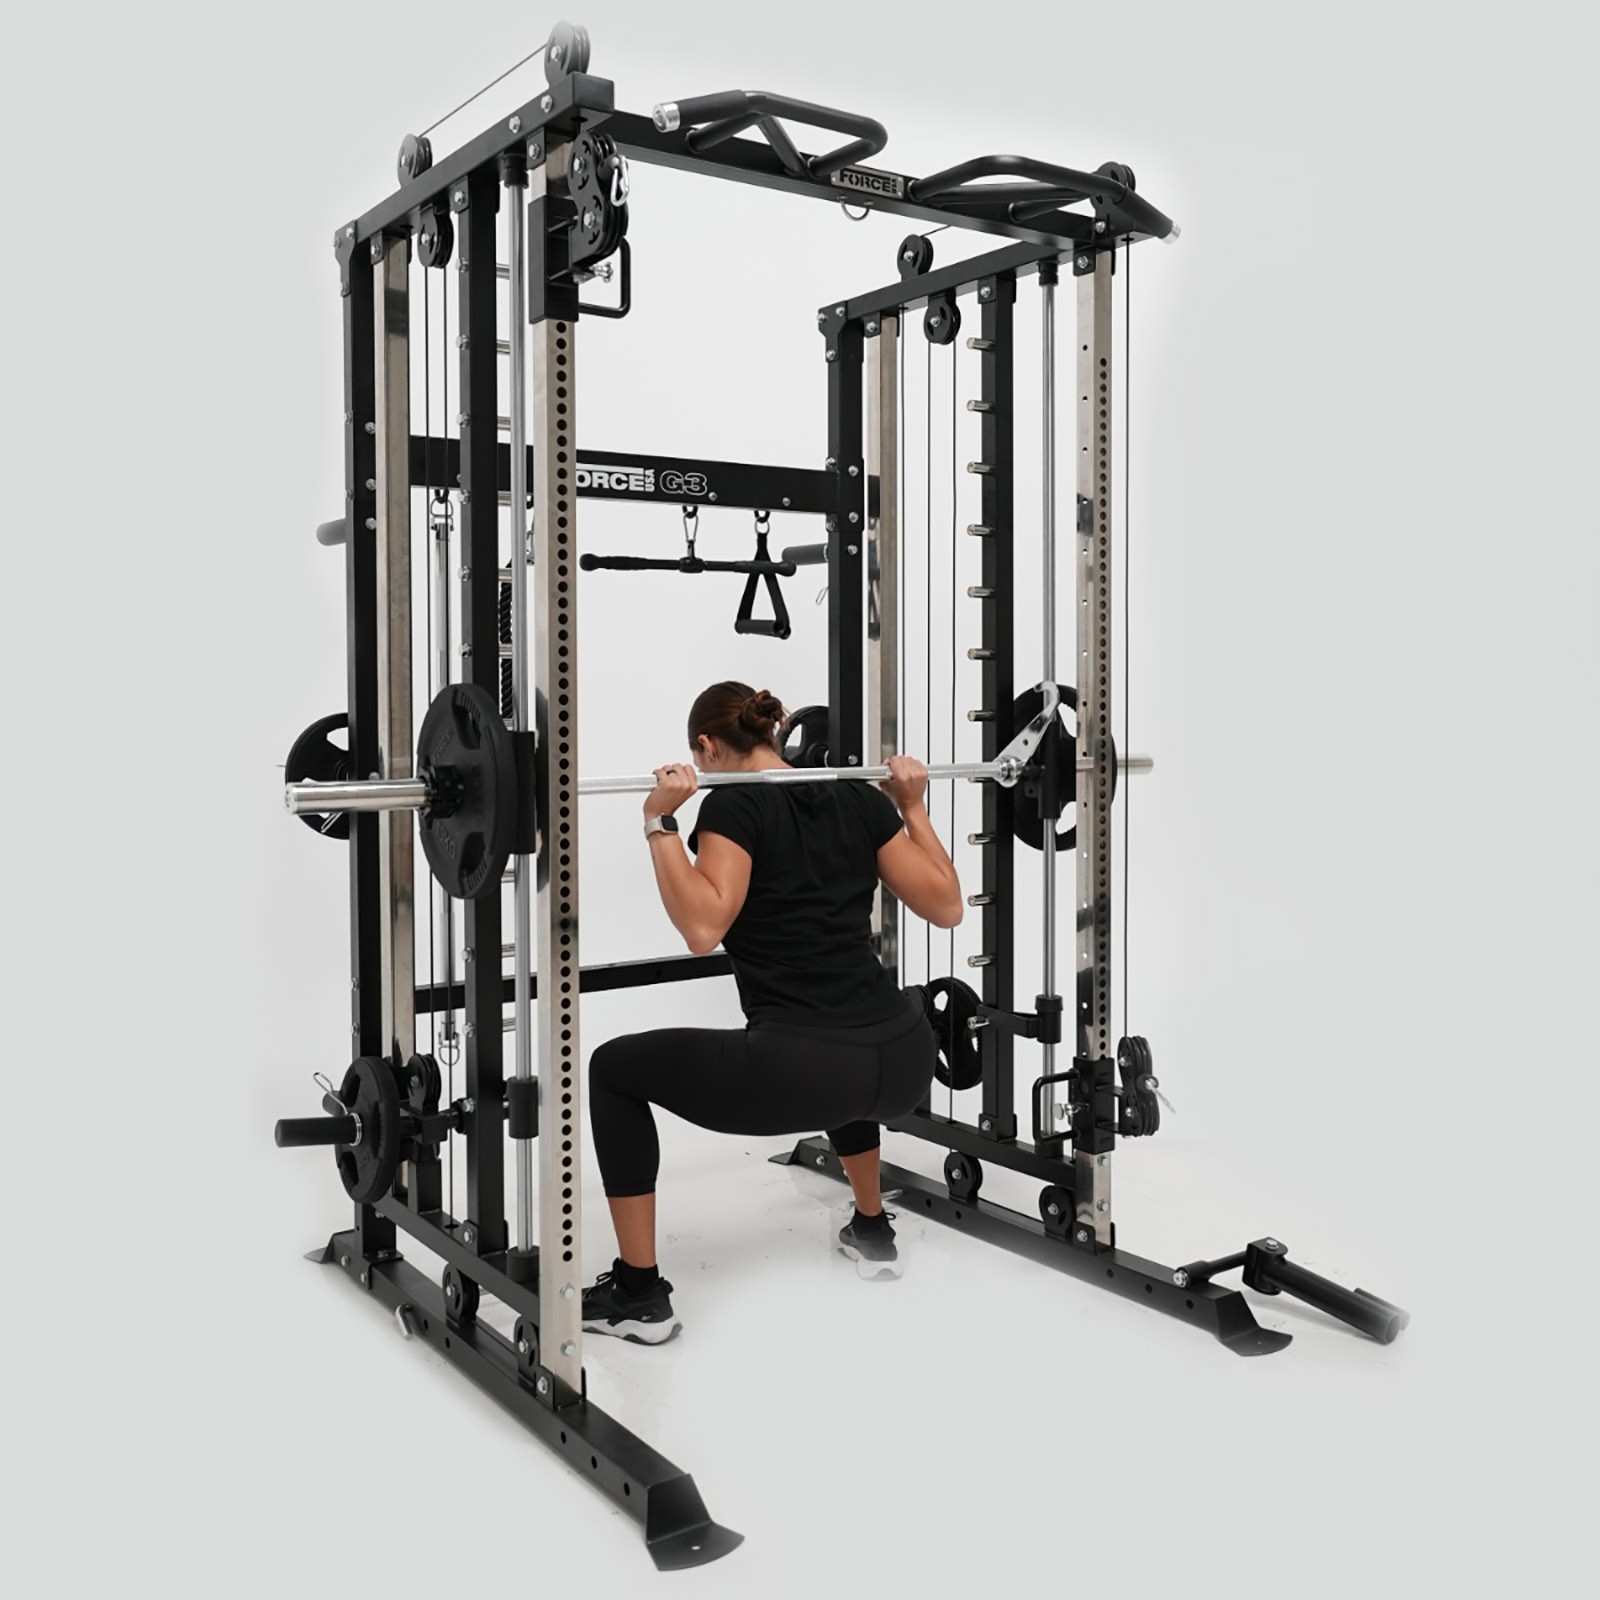 Smith machine in use